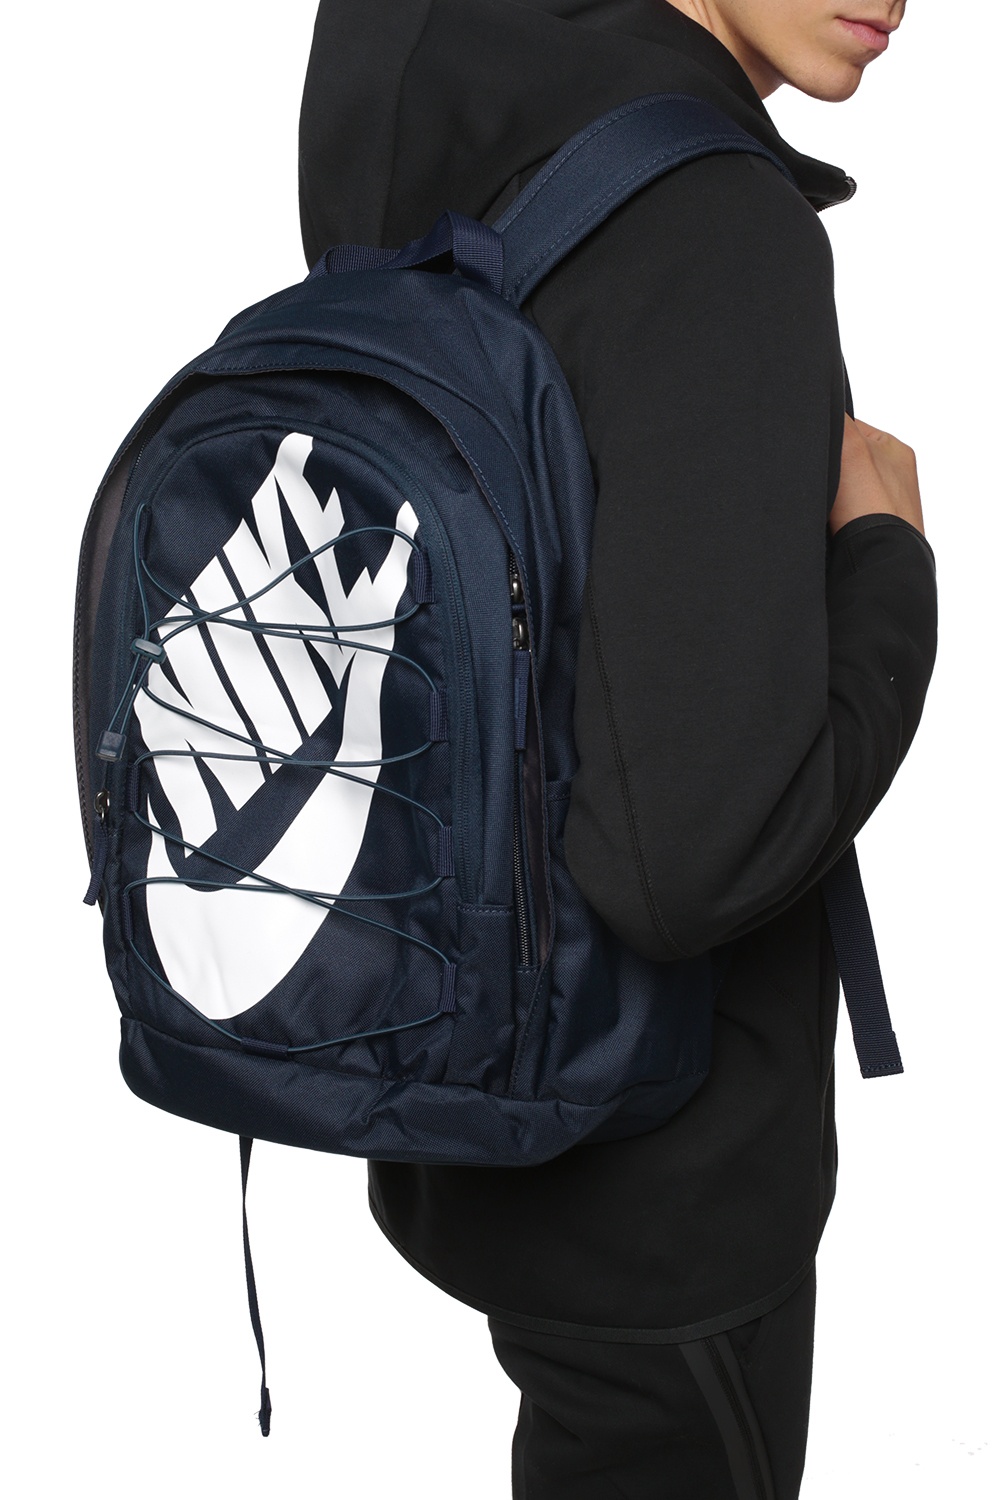 THE NIKE BACKPACK YOU NEED🖤, Gallery posted by itsnicandrea